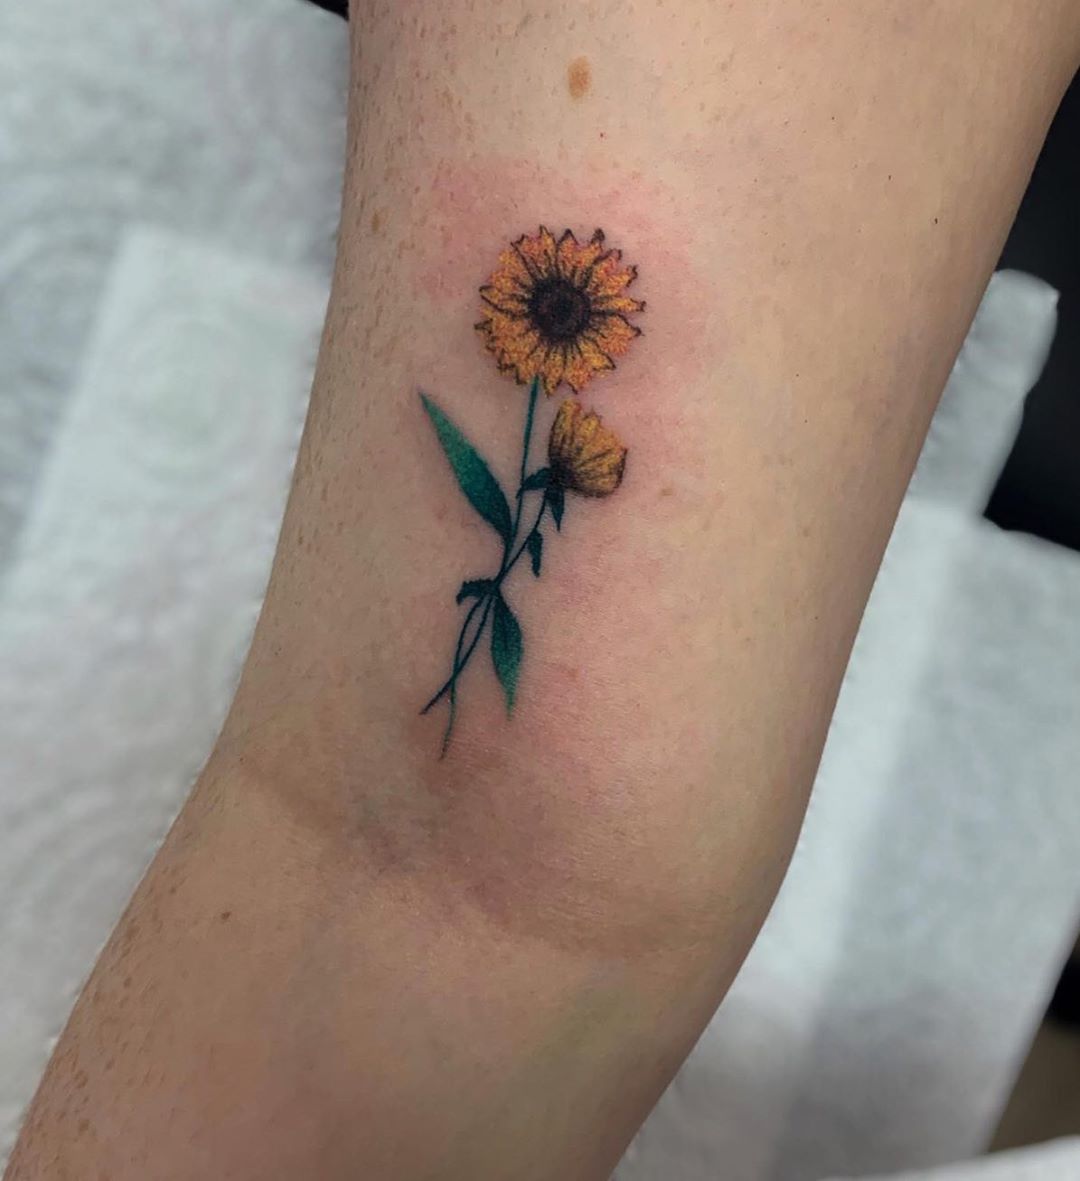 UPDATED] 50 Sunflower Tattoos to Bring Sunshine to Your Style